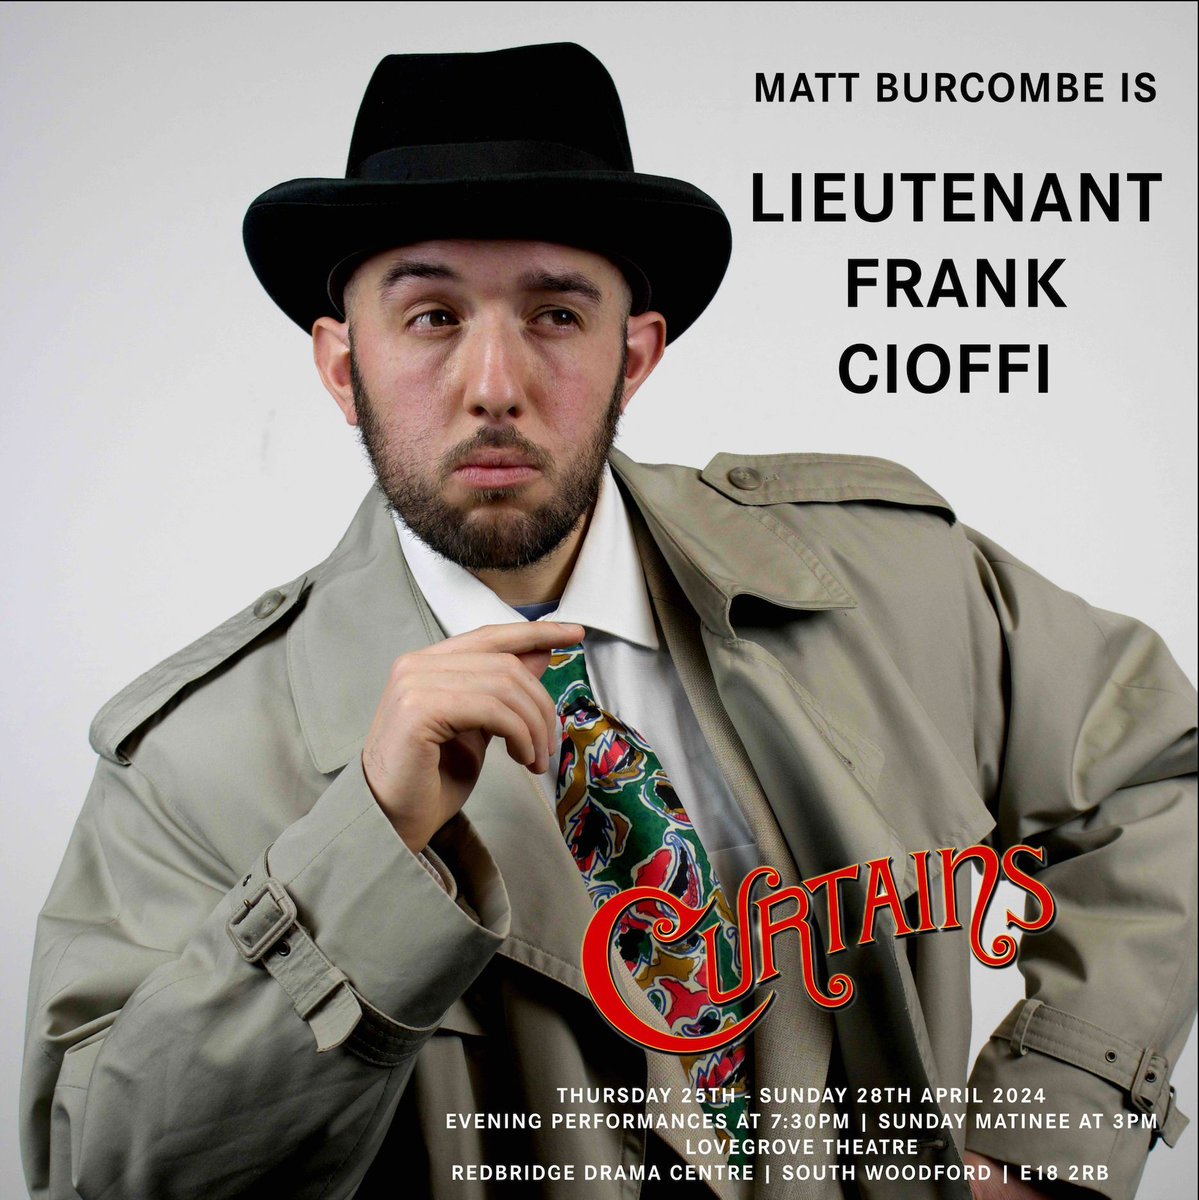 📢INTRODUCING📢 MATT BURCOMBE is LT. FRANK CIOFFI Will he solve the case? Find out in #Curtains at @RedbridgeDrama 25th-28th April 2024! All Tickets £20. Get your tickets here: buff.ly/3NRAuf5 #CurtainsMusical #KanderAndEbb #Musical #Redbridge #RedbridgeEvents